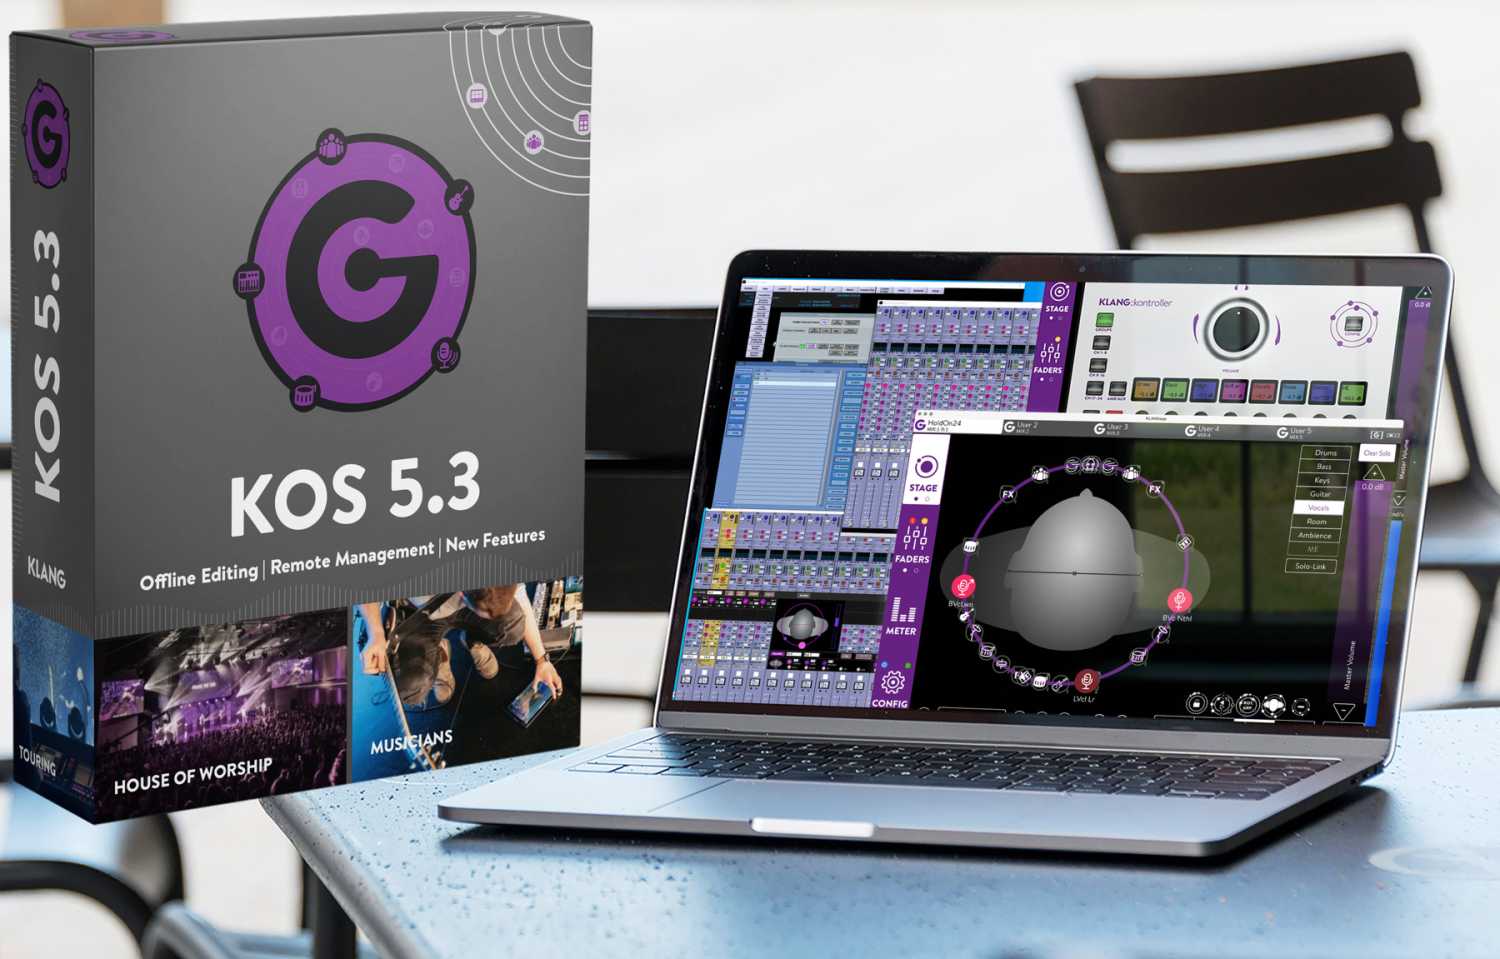 The new software version 5.3 is now available for download for all existing KLANG processors